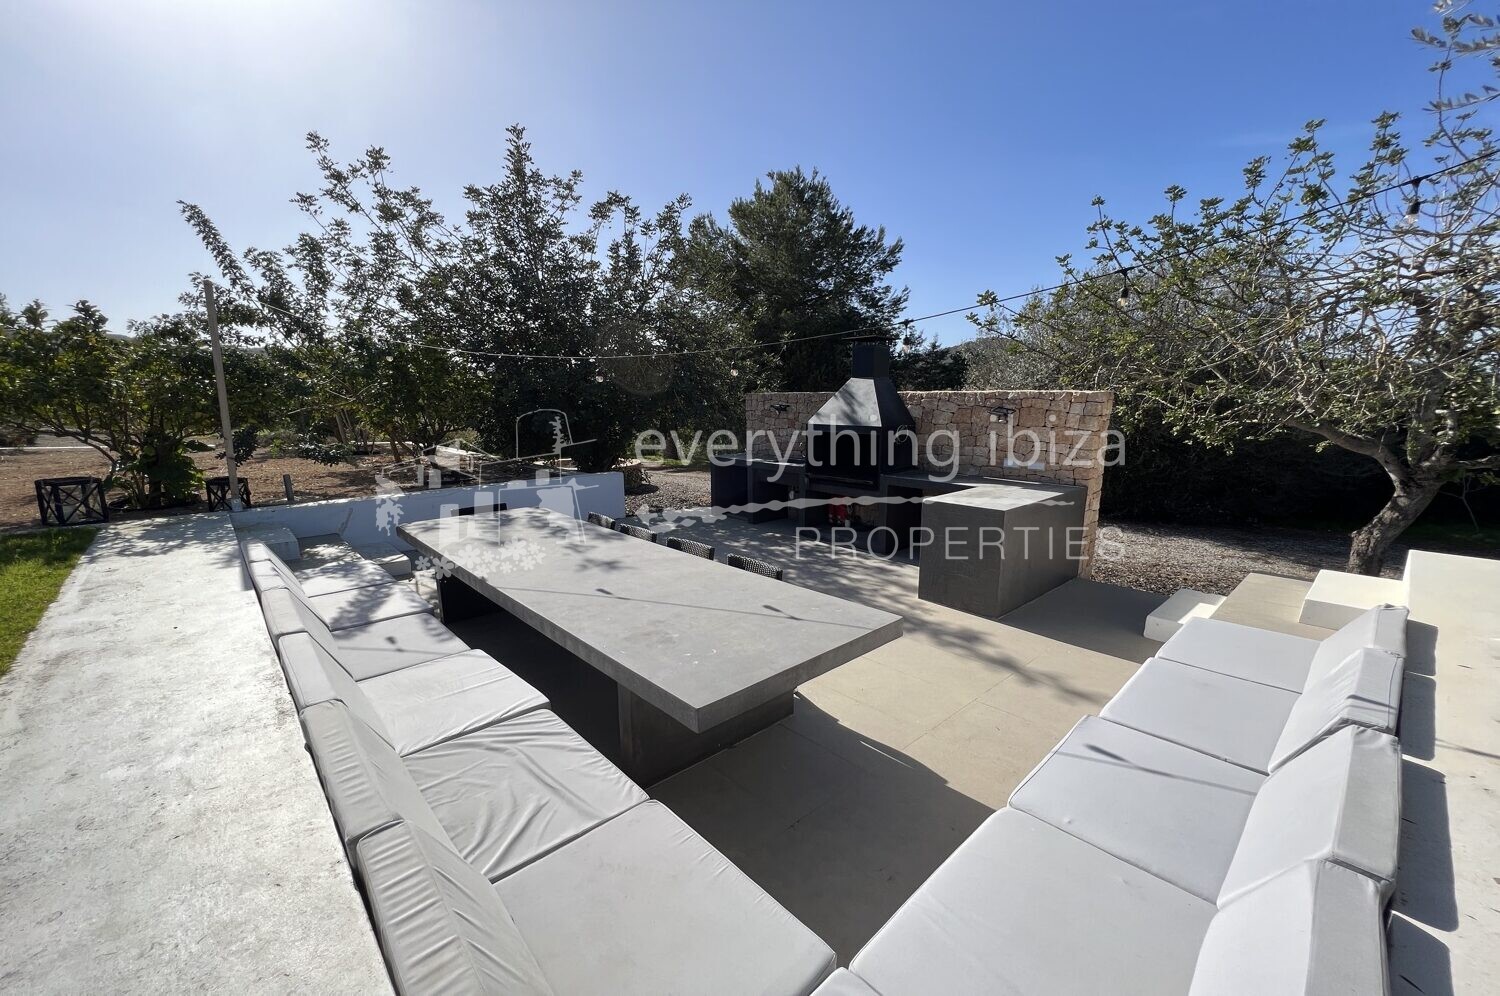 Magnificent Modern Villa Set in Beautiful Countryside, ref. 1423, for sale in Ibiza by everything ibiza Properties